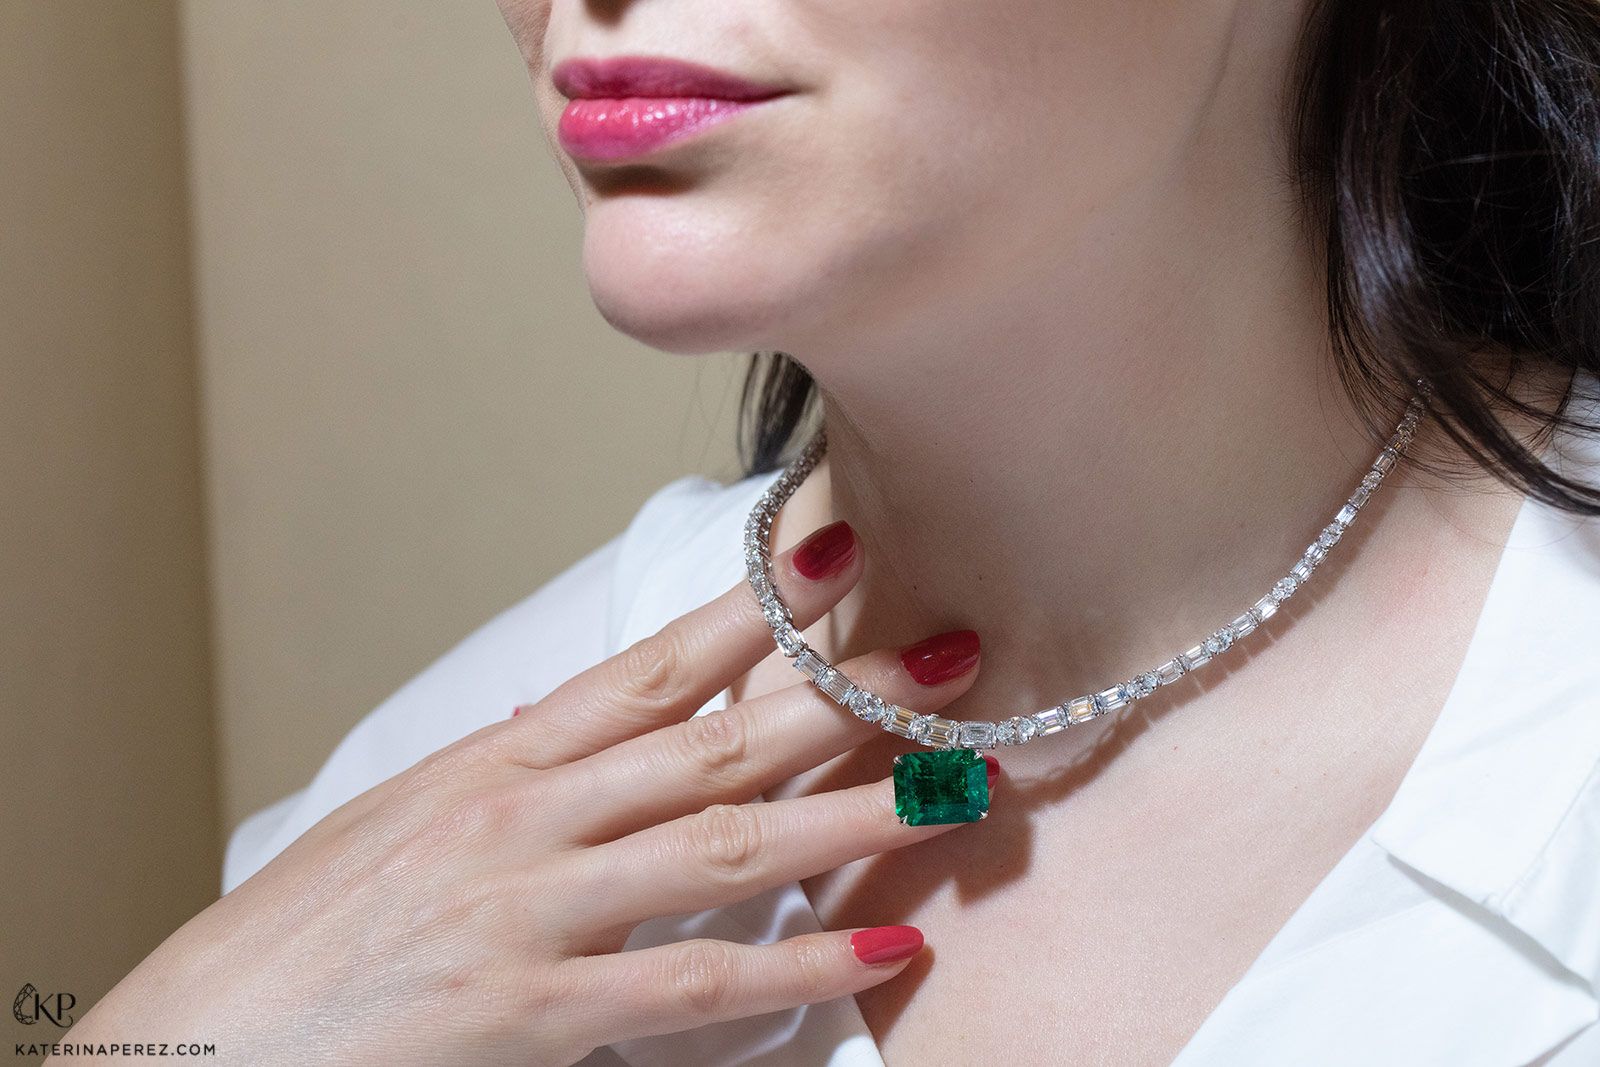 Sirus Tanya necklace with a 14.45 carat Colombian emerald and colourless fancy-cut diamonds